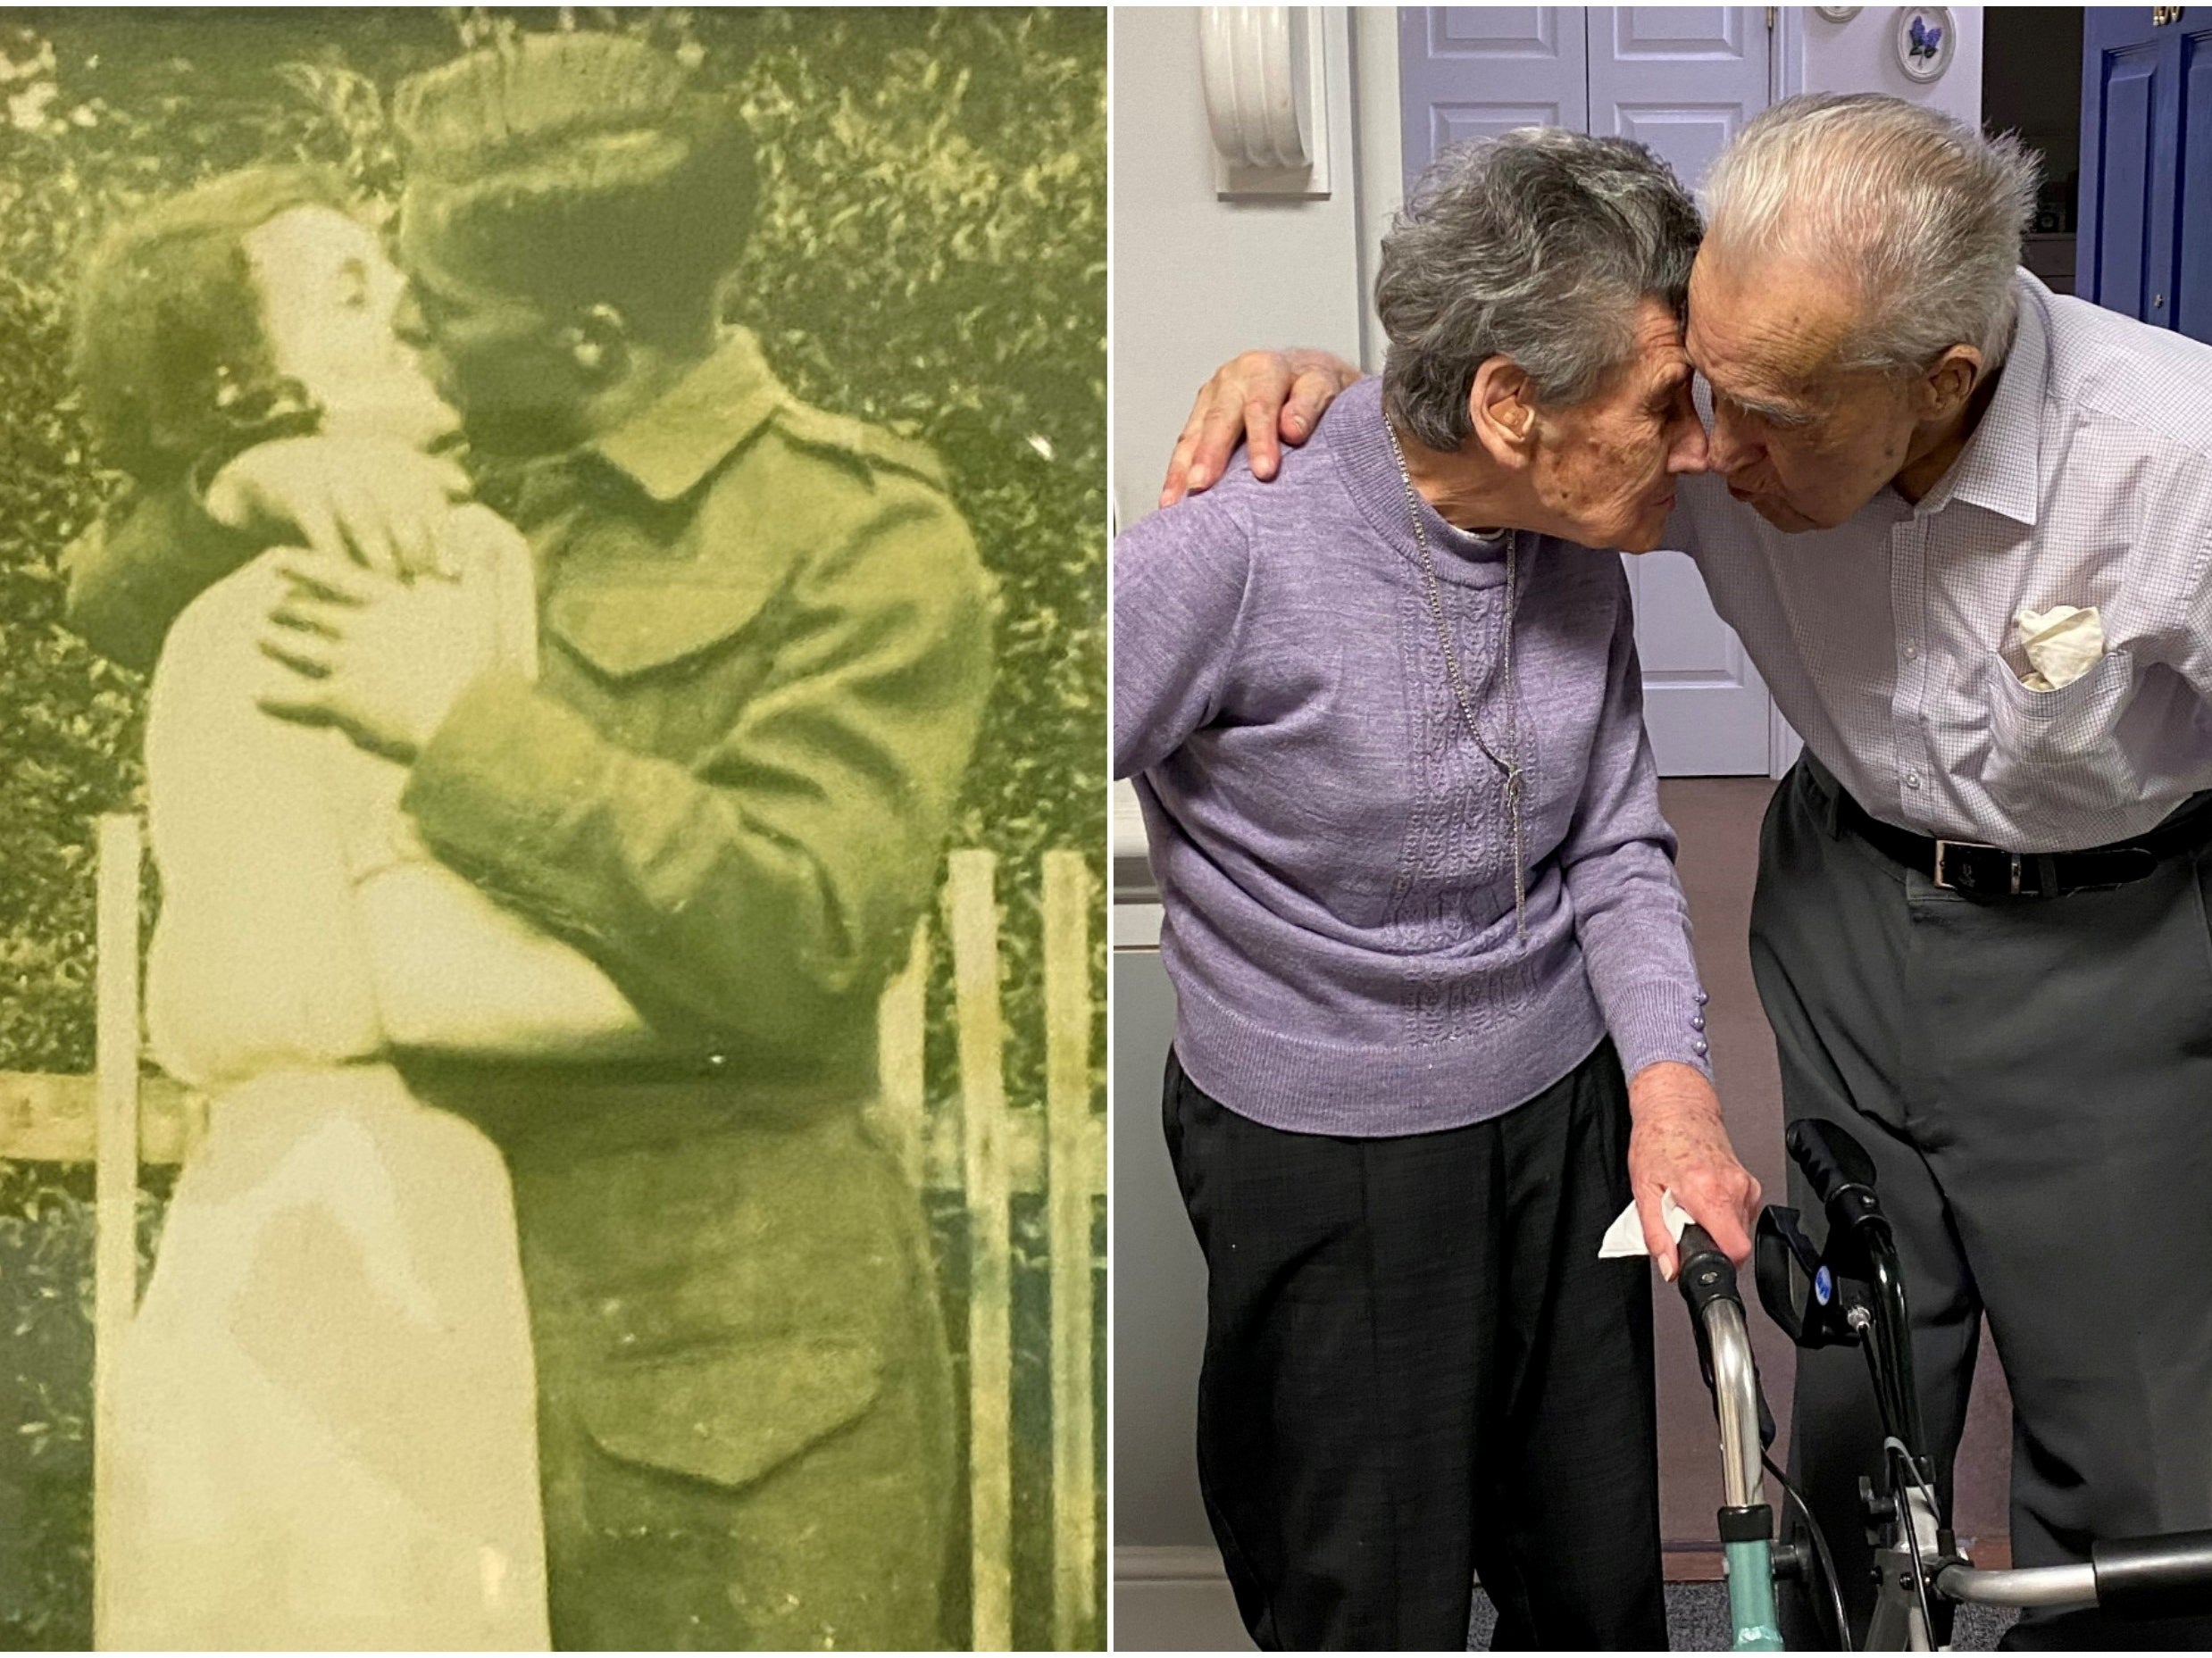 Ron and Joyce Bond, from Milton Keynes, Bucks, could be Britain's longest-married couple after they celebrated their 81st wedding anniversary last week